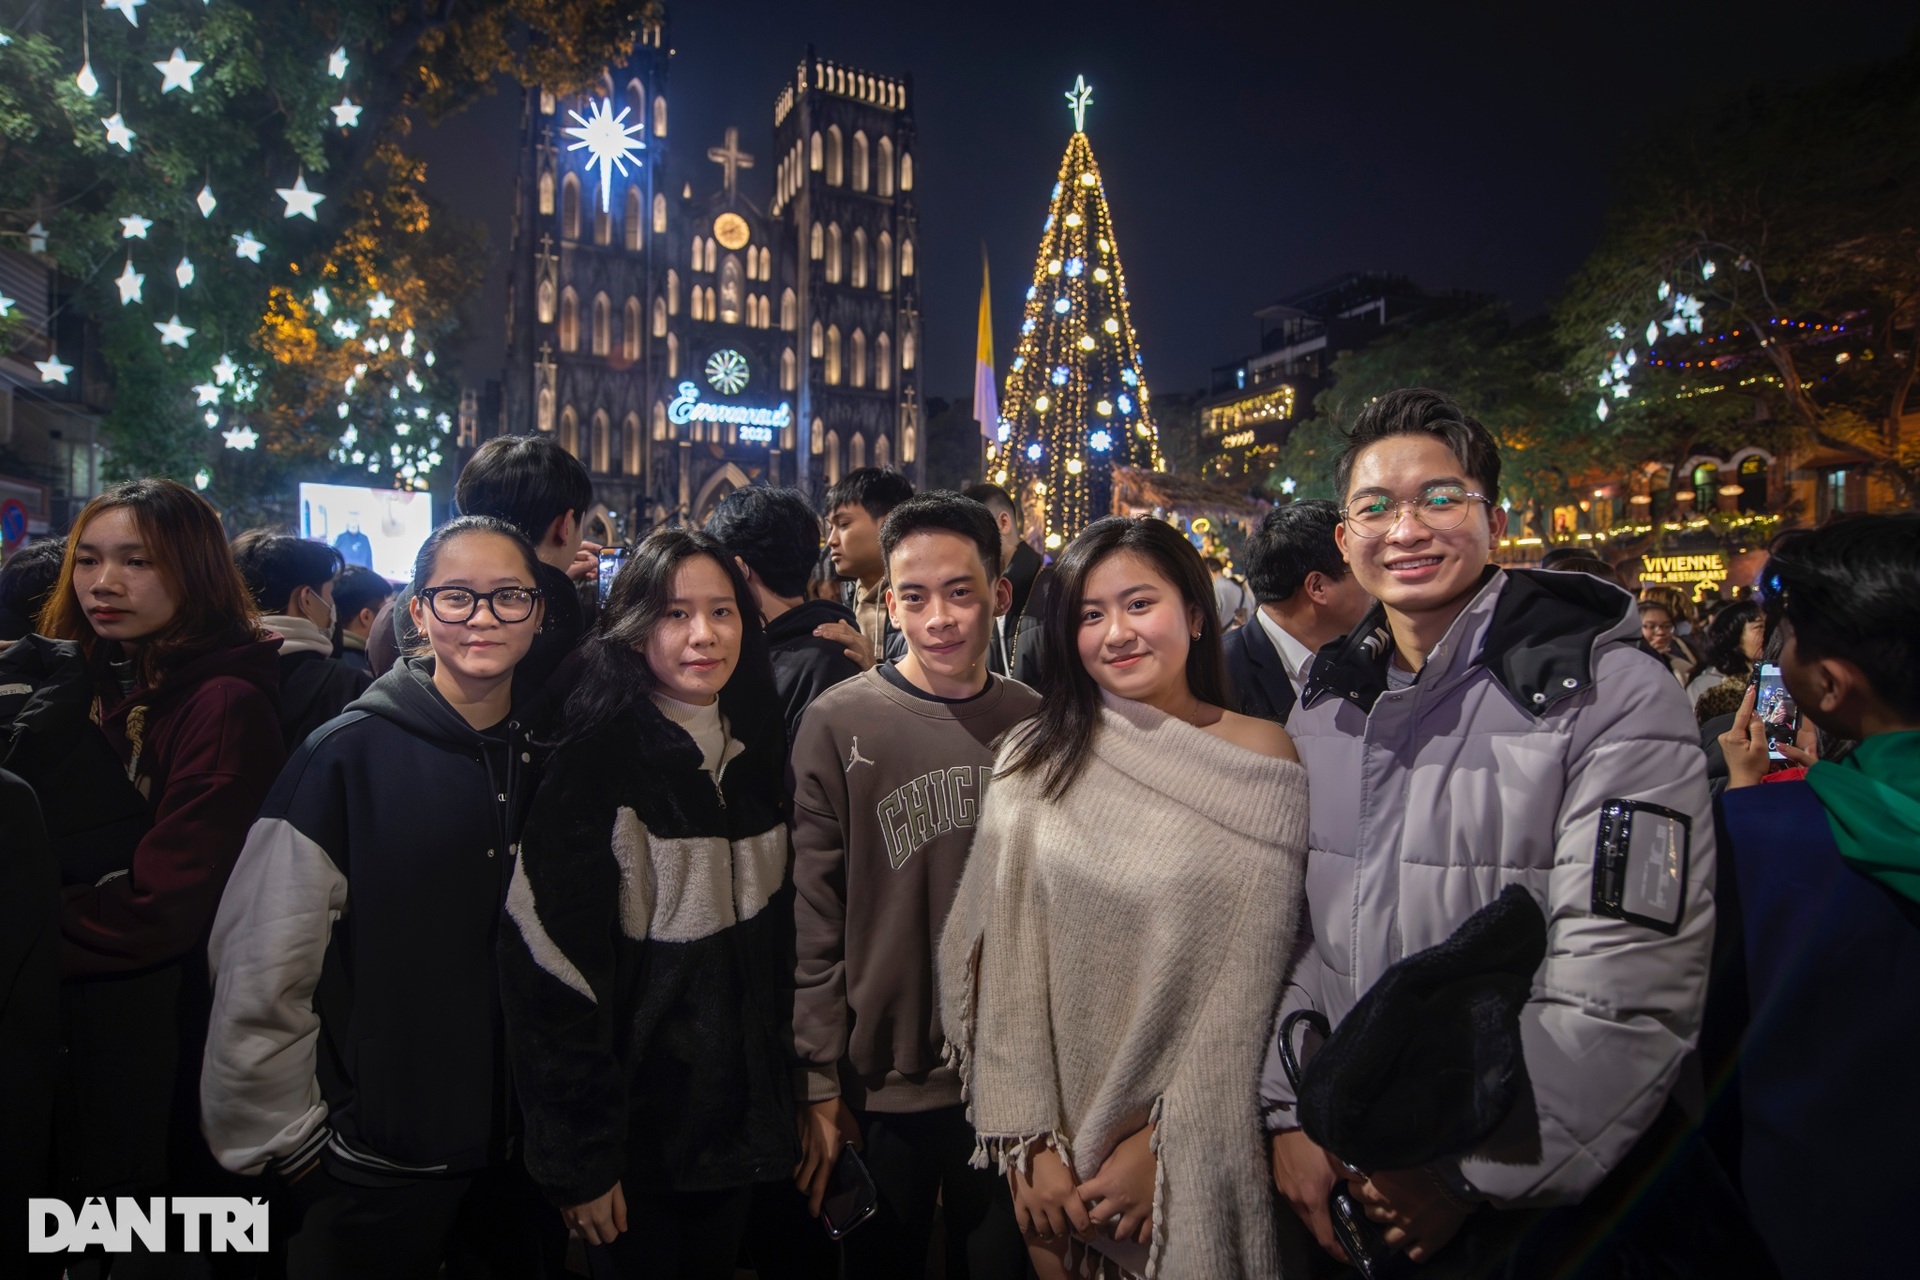 Hanoi is 10 degrees Celsius cold, young people still flock to the Cathedral on Christmas Eve - December